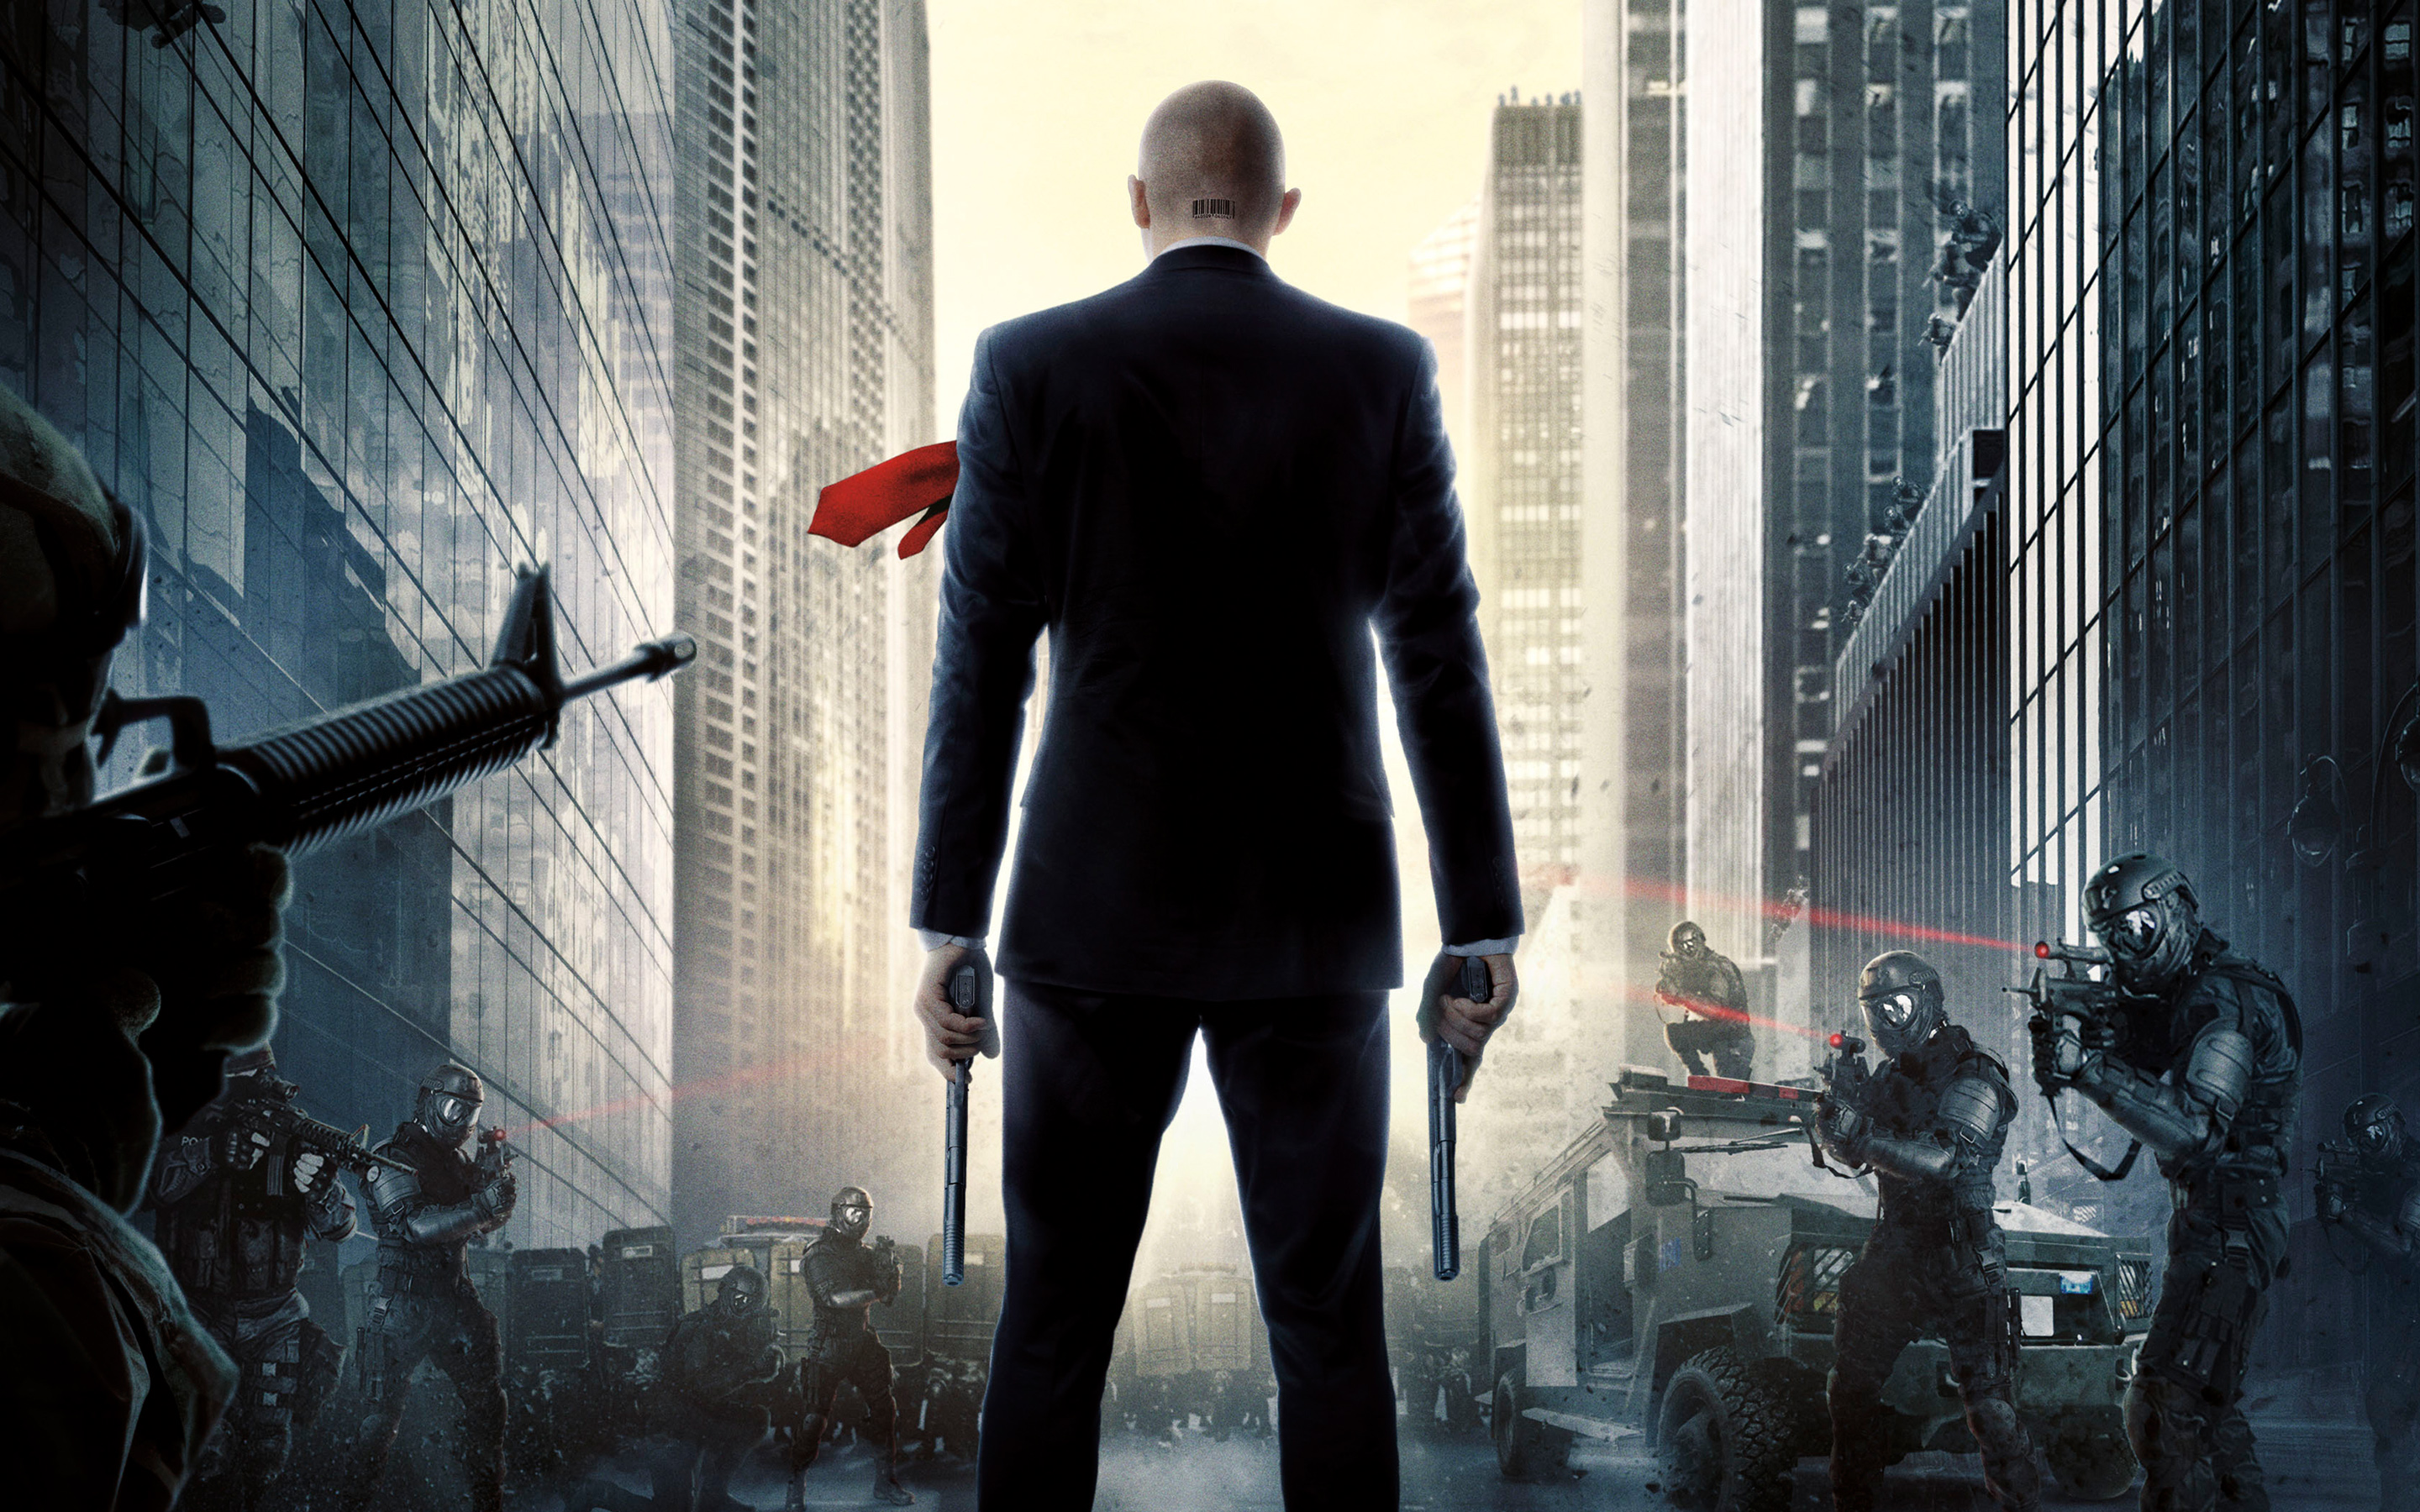 Free Download Hitman Agent 47 15 Movie Wallpapers Hd Wallpapers x1800 For Your Desktop Mobile Tablet Explore 44 Hitman Wallpaper Full Hd Hitman Blood Money Wallpaper Hitman Absolution Wallpaper Hitman Wallpaper For Computer